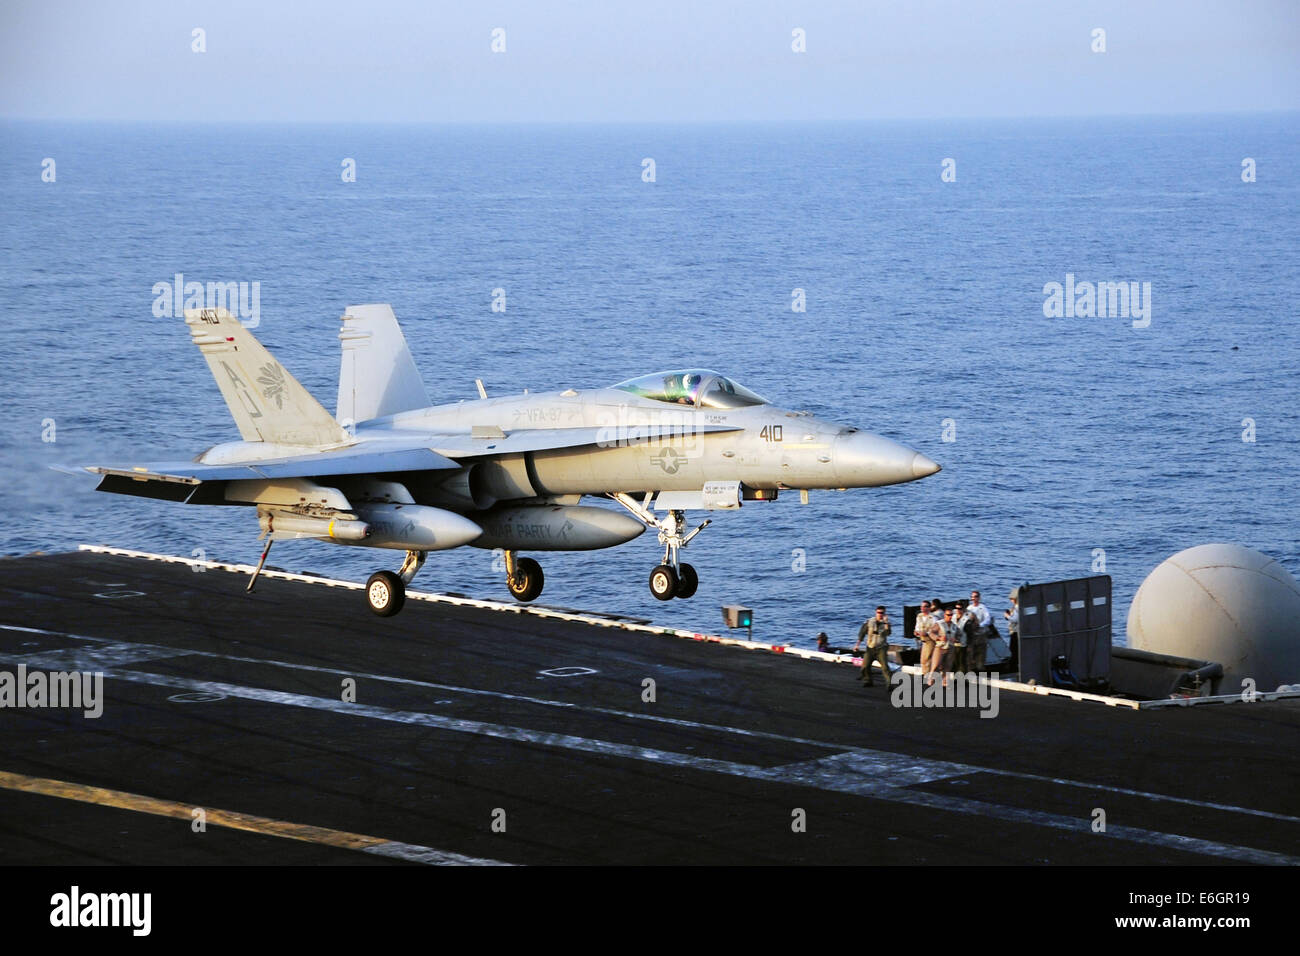 A US Navy F/A-18C Hornet fighter aircraft lands on the flight deck of the aircraft carrier USS George H.W. Bush after a mission to support the Iraqi military August 12, 2014. President Obama authorized targeted airstrikes to protect U.S. personnel from extremists known as the Islamic State in Iraq and the Levant. Stock Photo